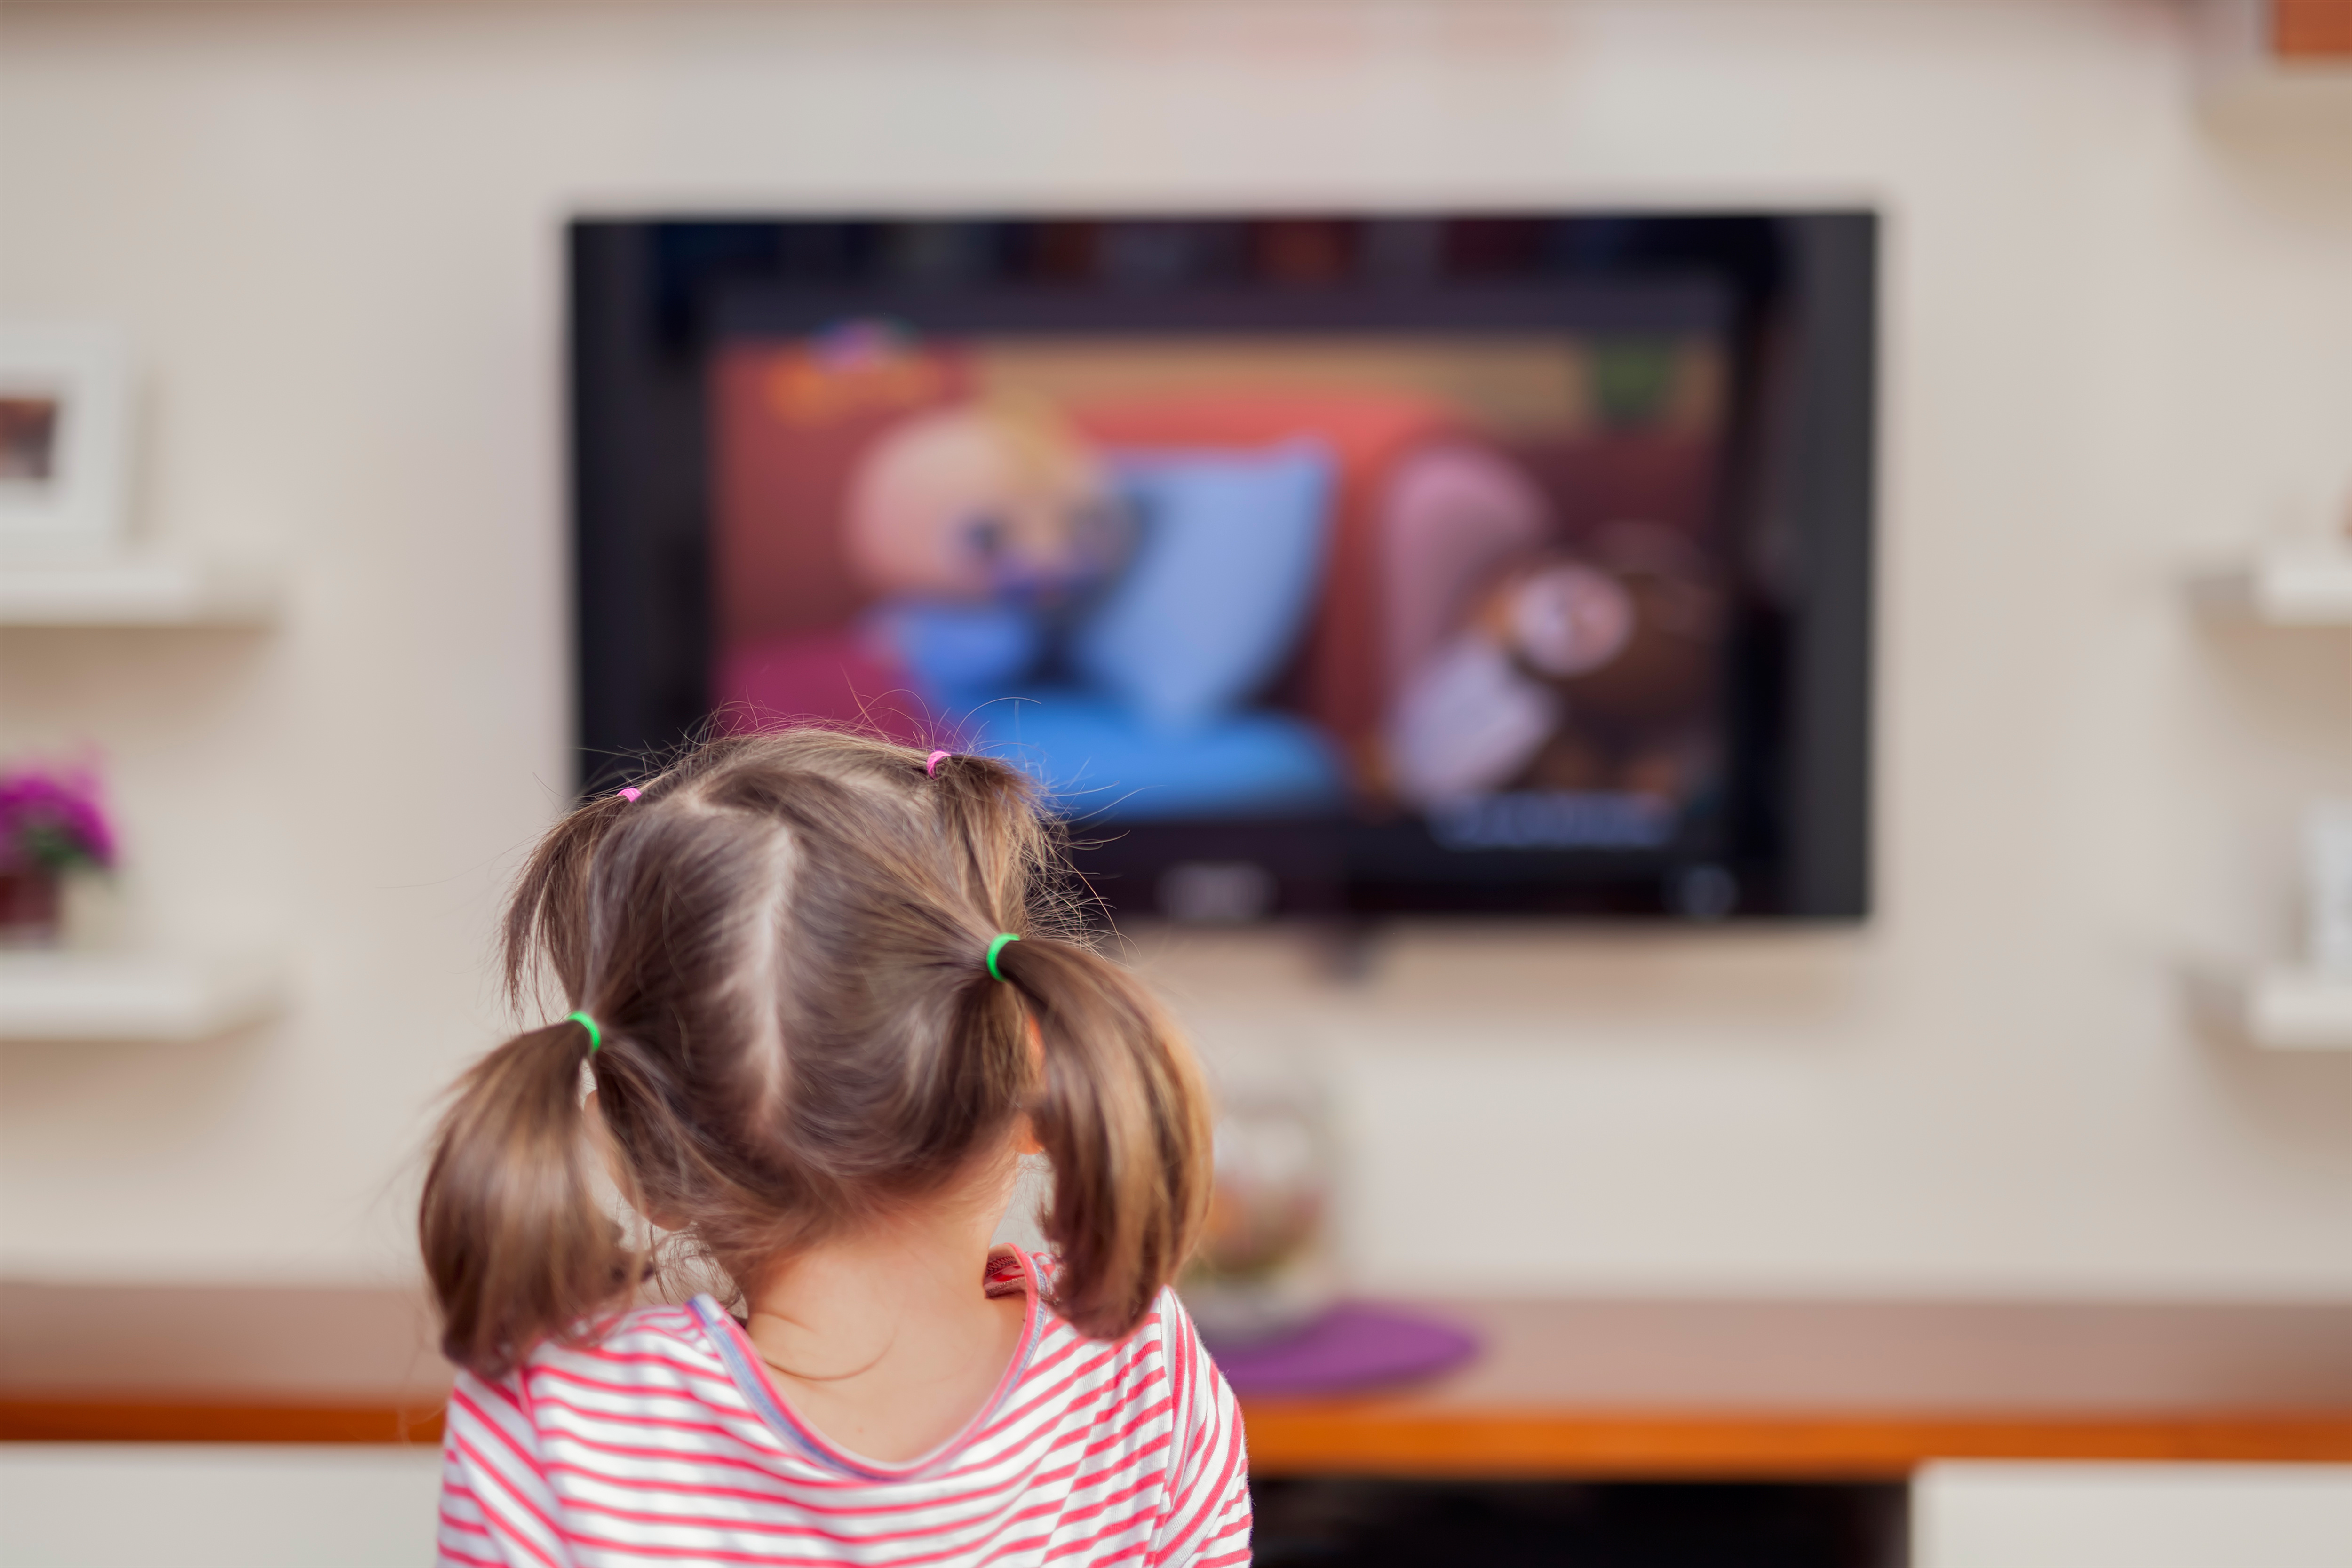 Eco appliances: energy-saving hints for televisions